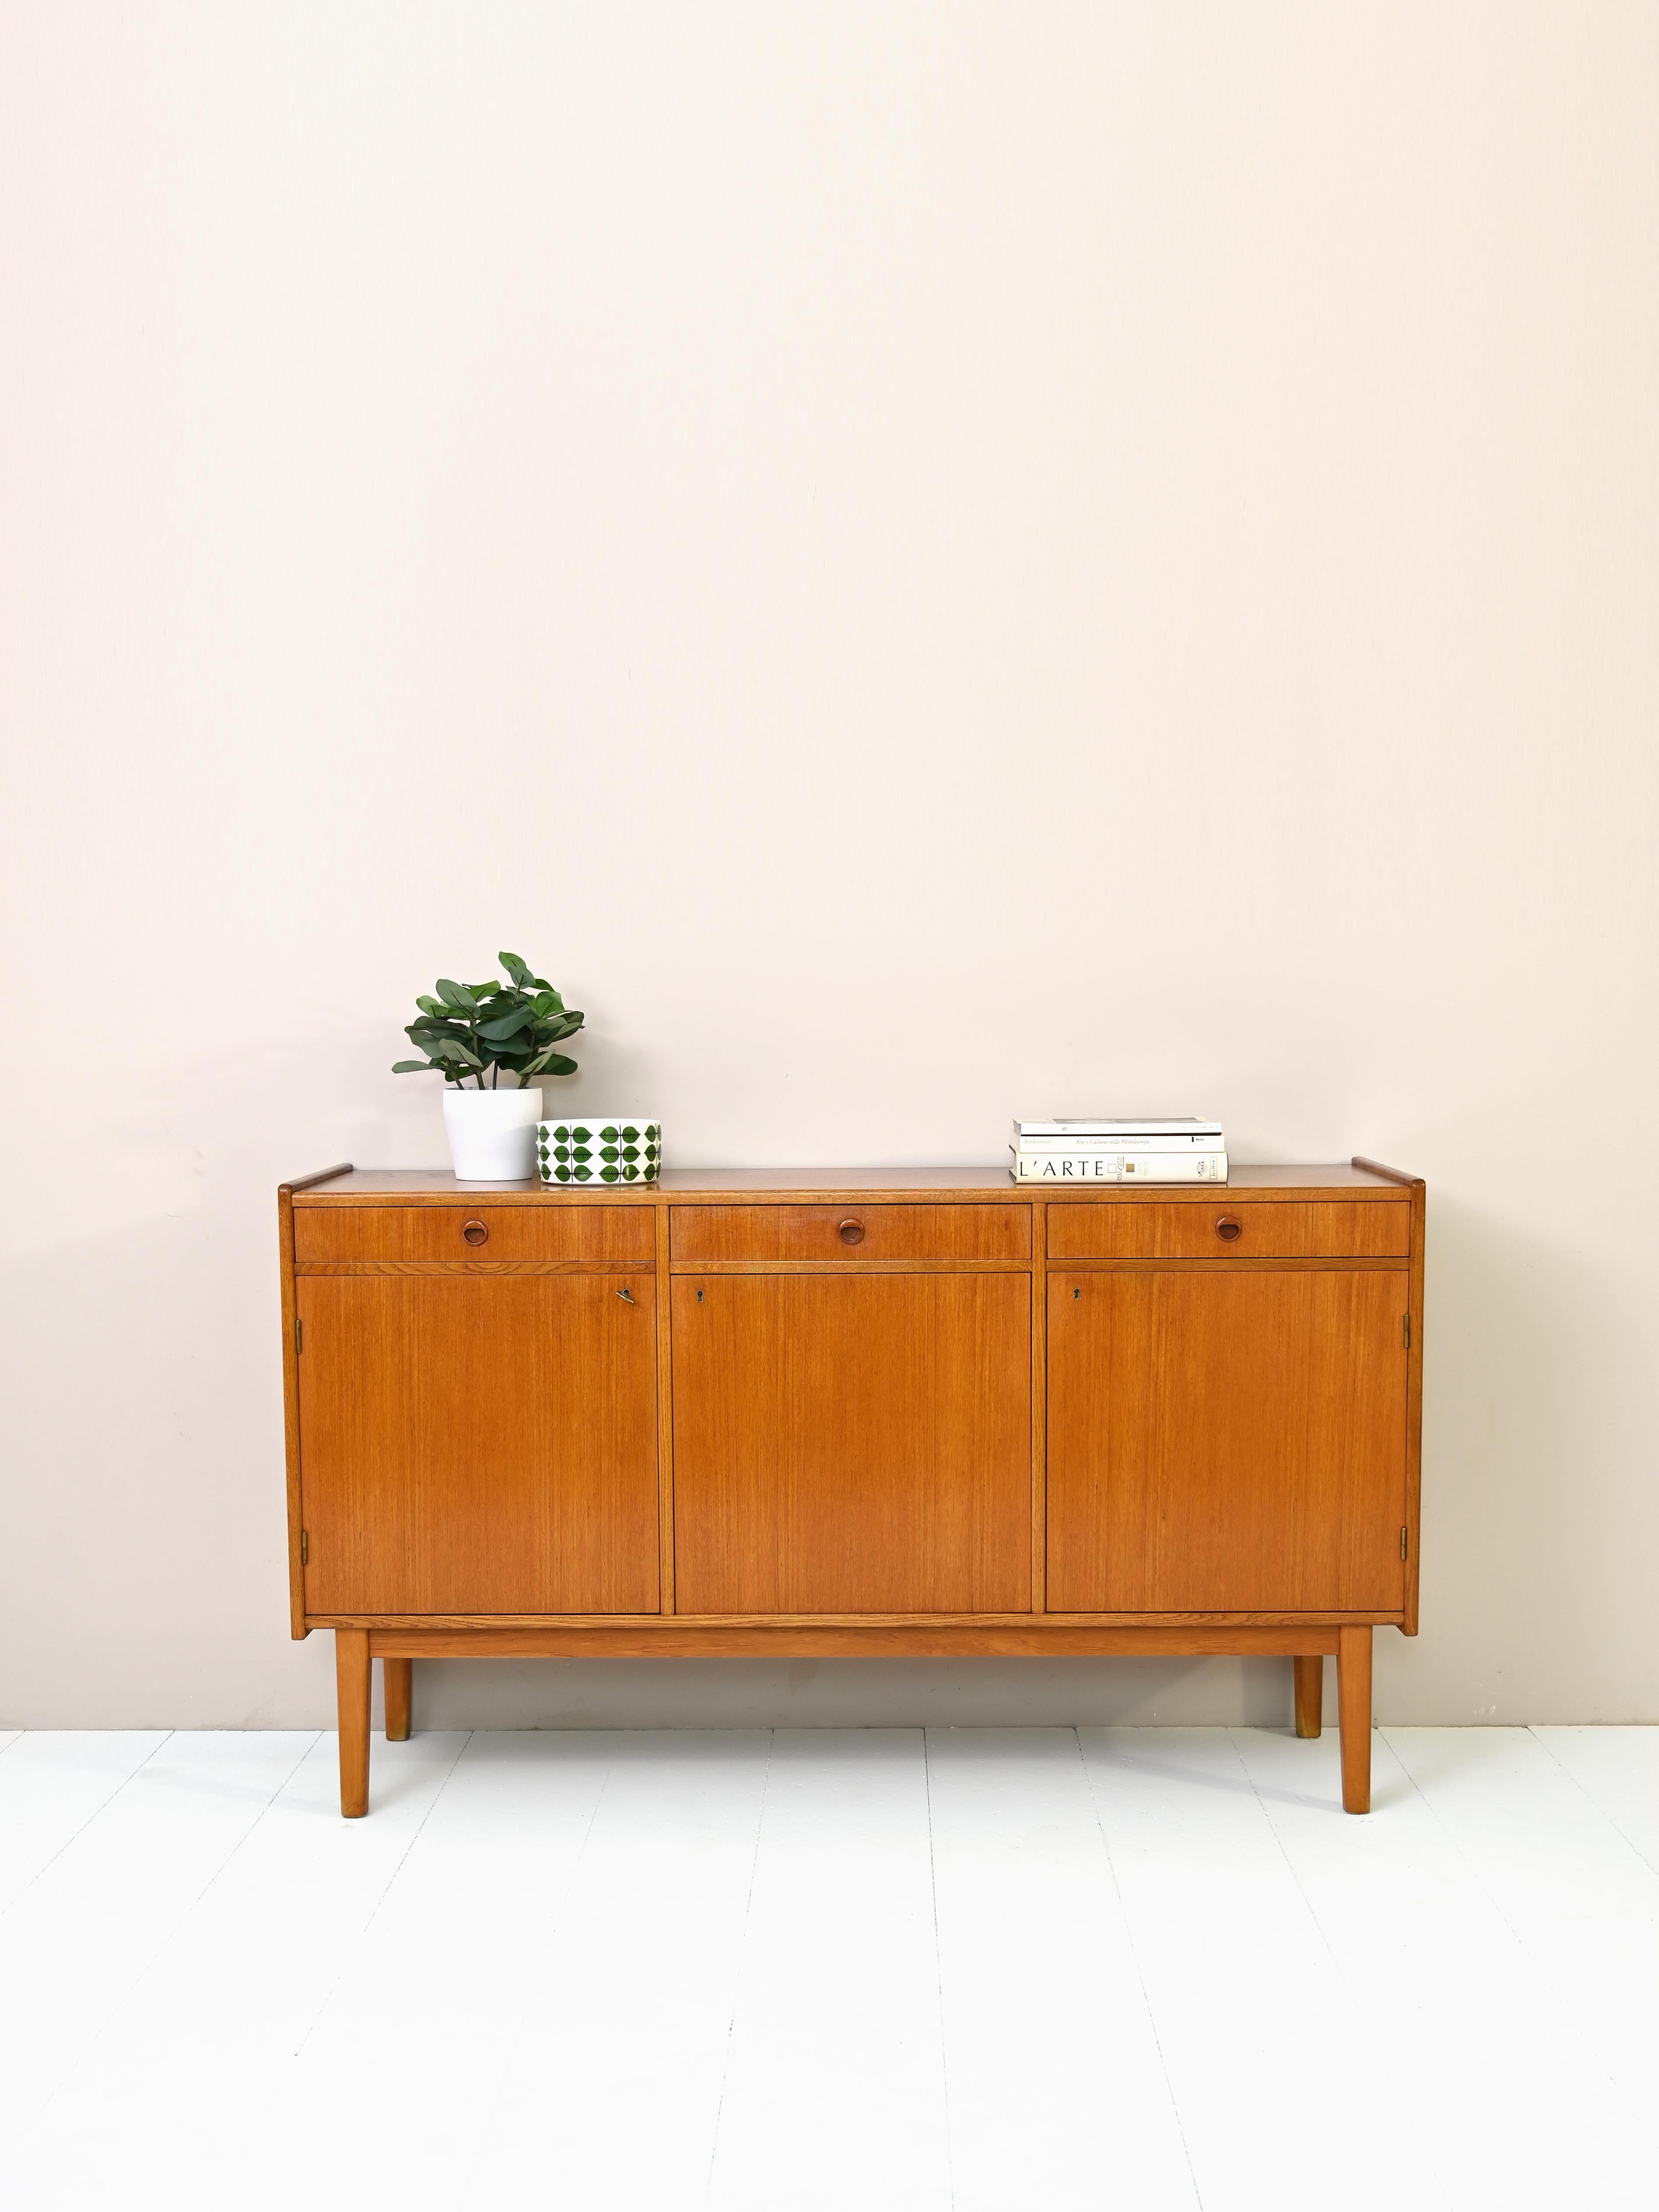 Original 1950s sideboard of Scandinavian provenance.
 
Divided into three equal parts consisting of a drawer under which is a compartment equipped with a shelf.

Swedish craftsmanship is evidenced in the attention to detail.

The square,